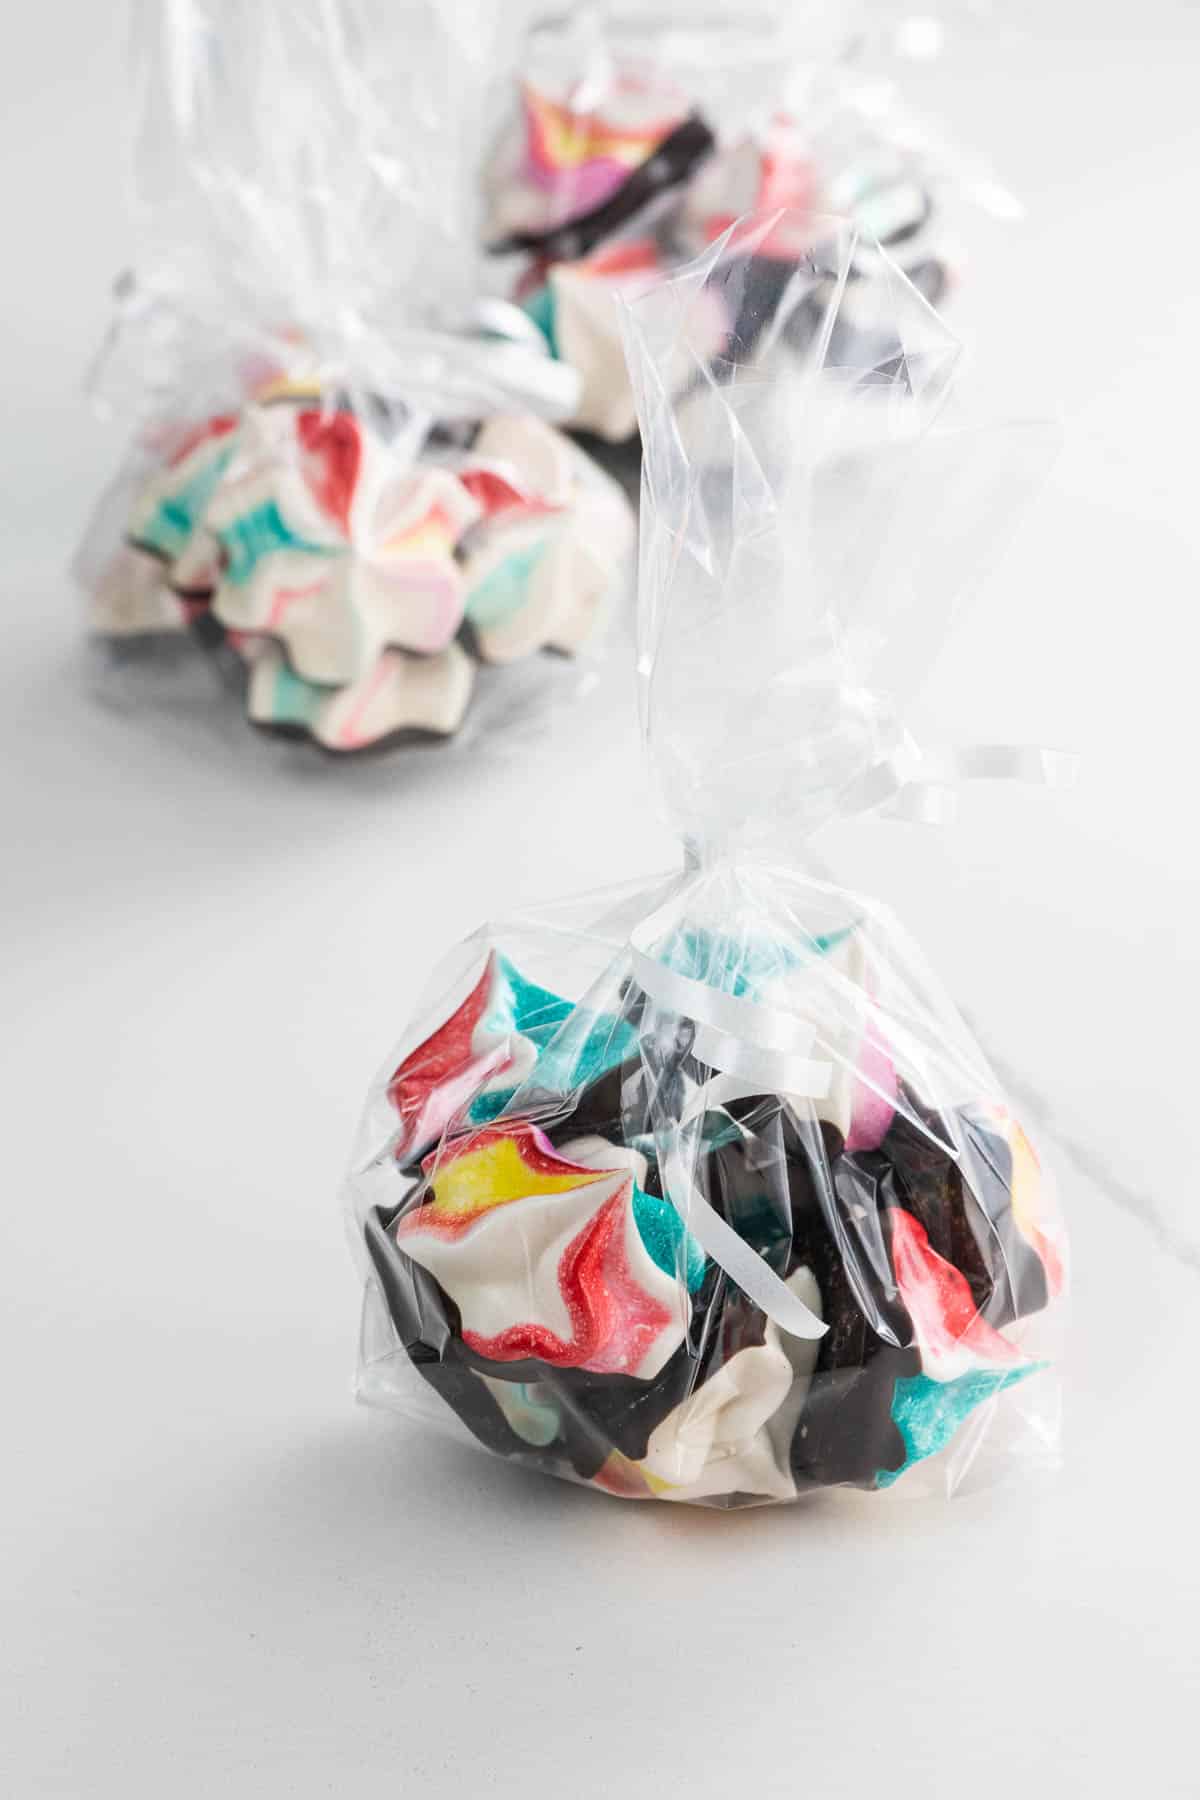 rainbow-colored chocolate meringue cookies in cellophane bags ready for gifting